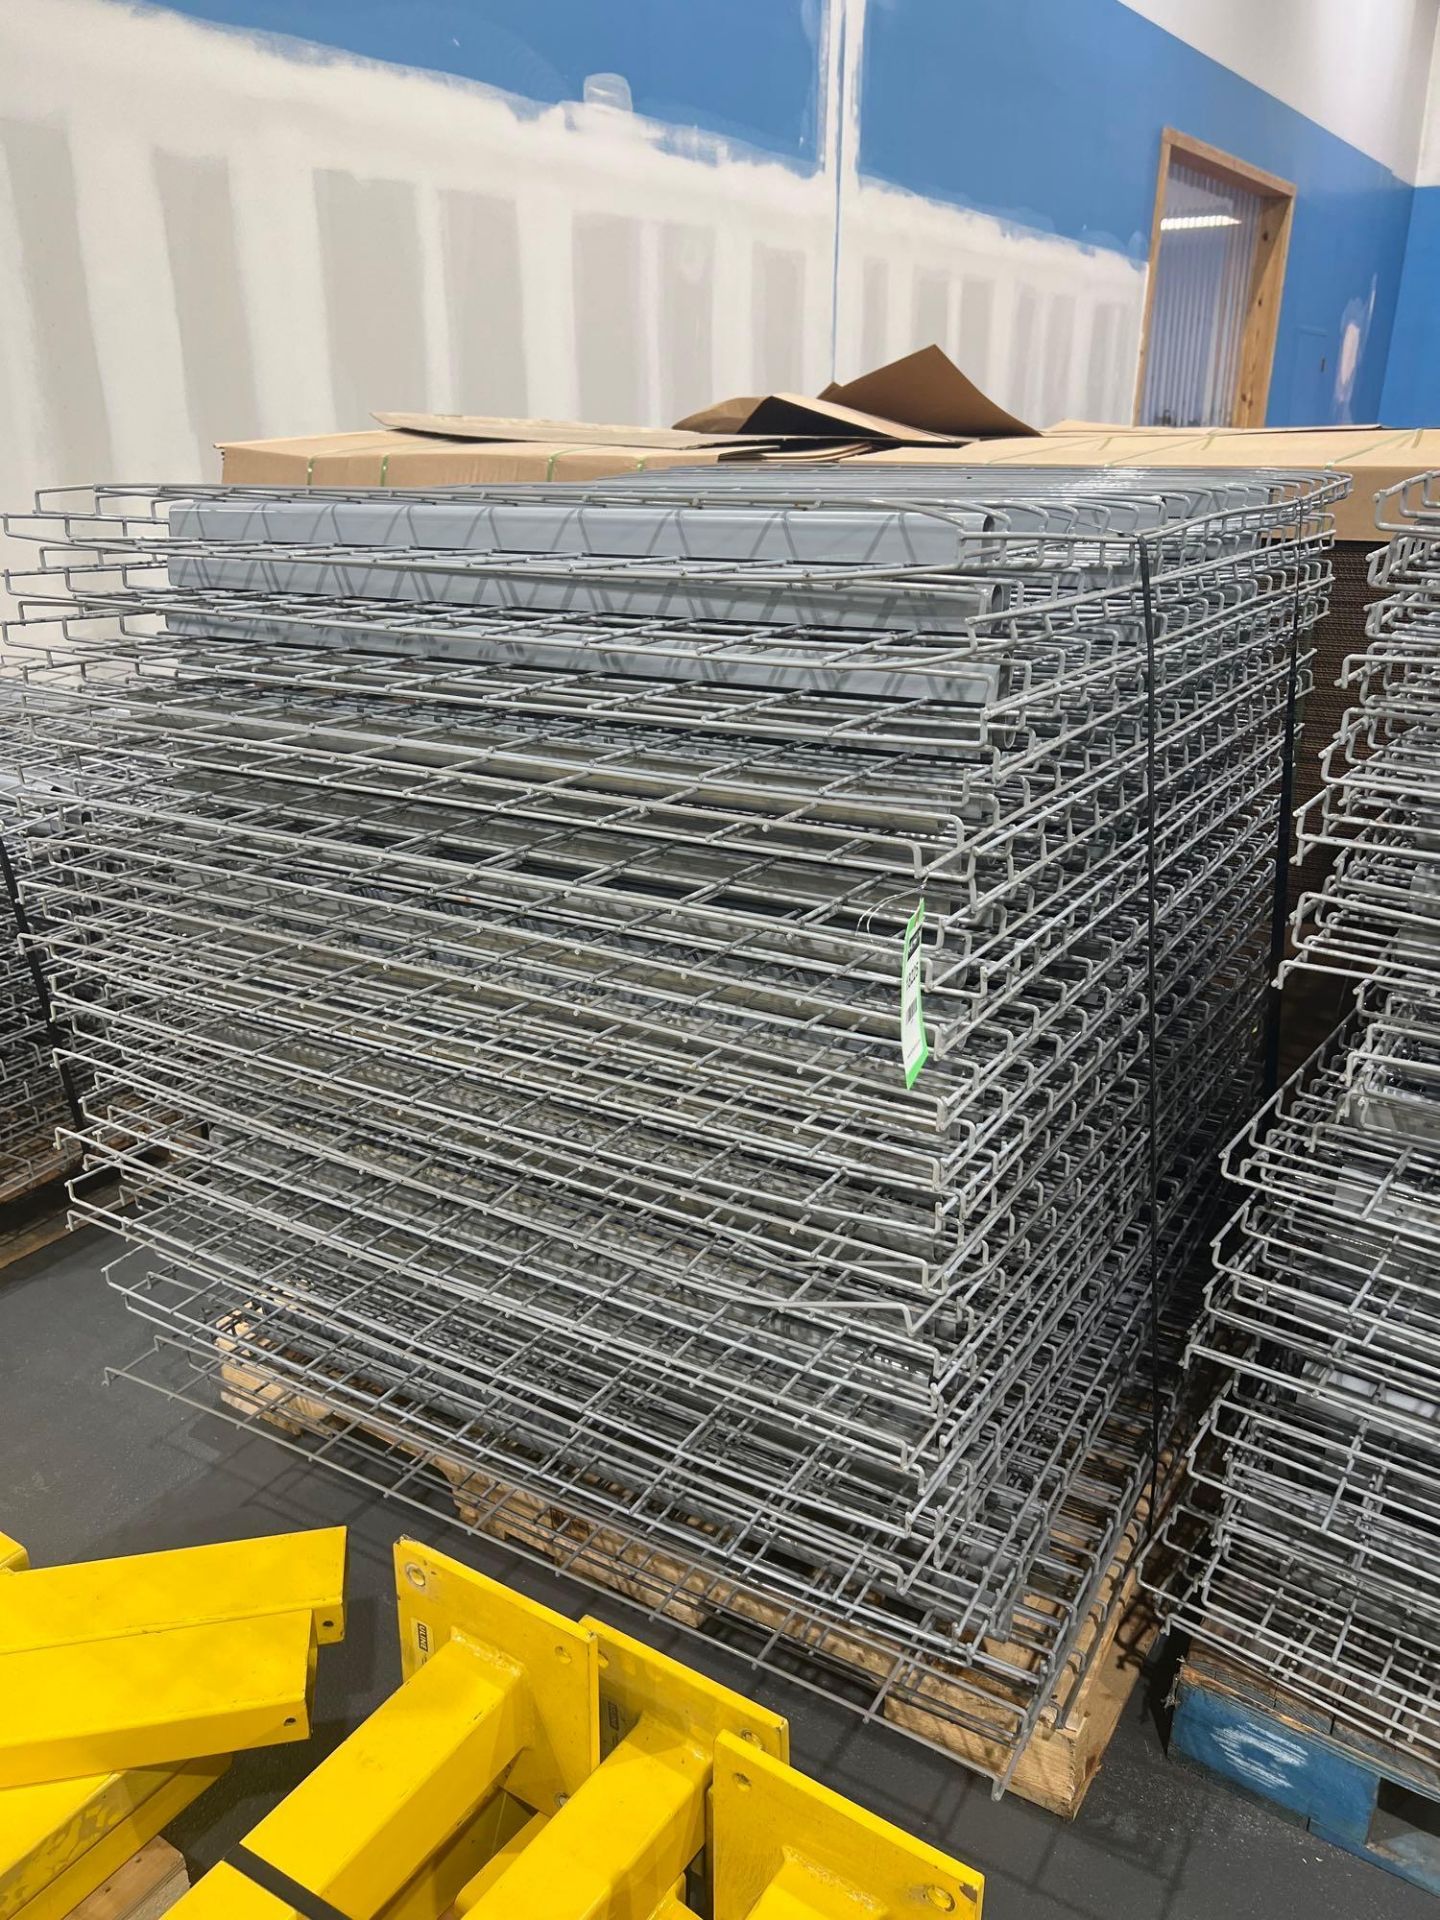 PALLET OF APPROX. 44 WIRE GRATES FOR PALLET RACKING, APPROX. DIMENSIONS 43" X 45" - Image 4 of 4